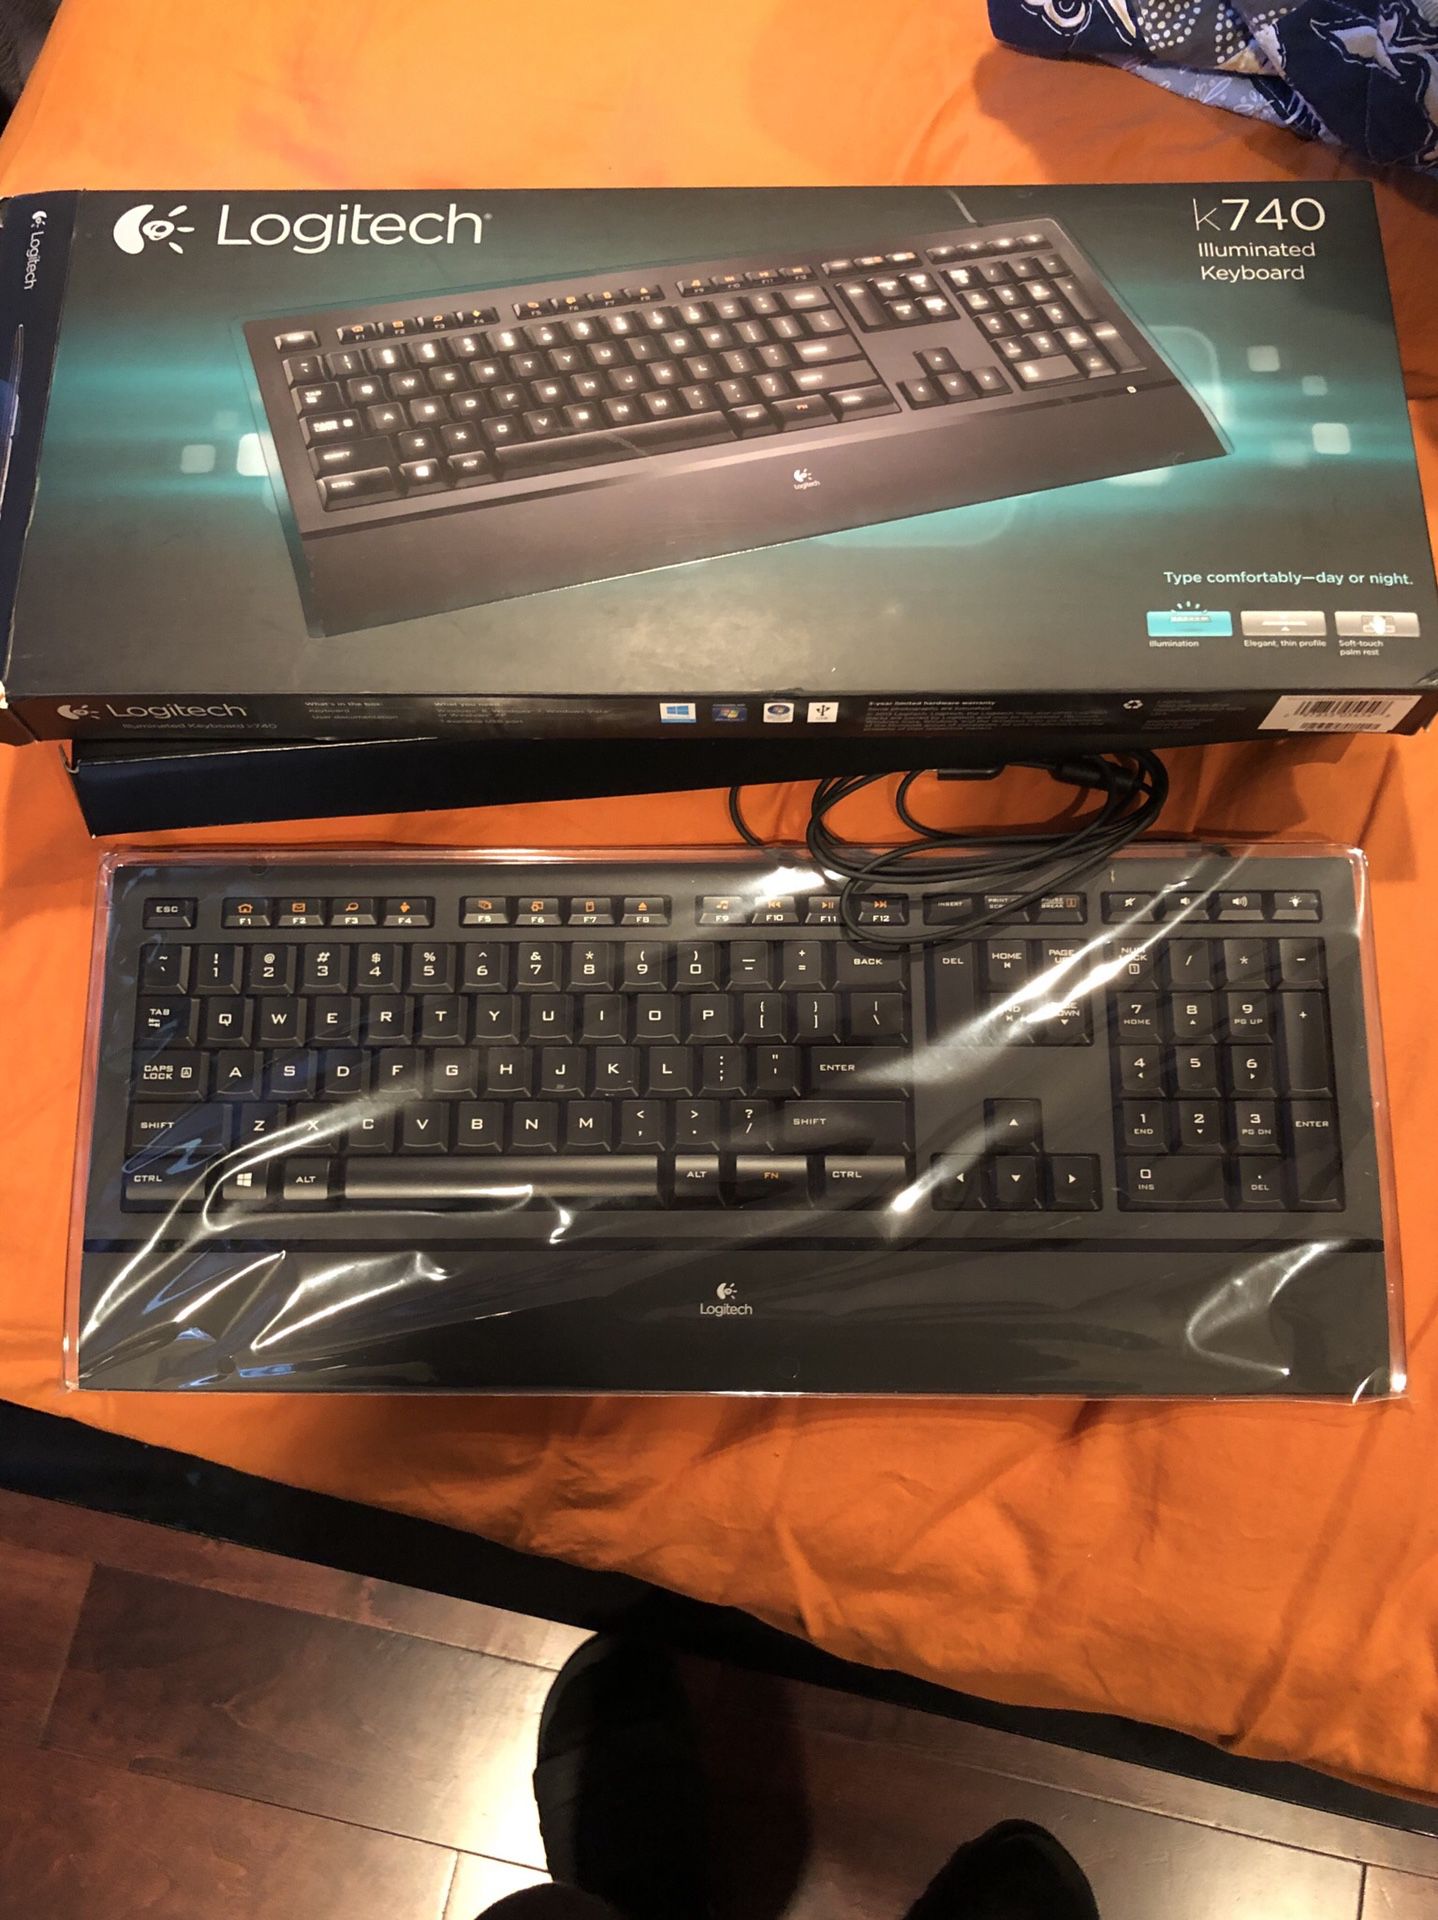 Logitech Ultrathin Keyboard K740 with Laser-etched Backlit and Soft-touch Palm Rest for Sale Burbank, CA - OfferUp